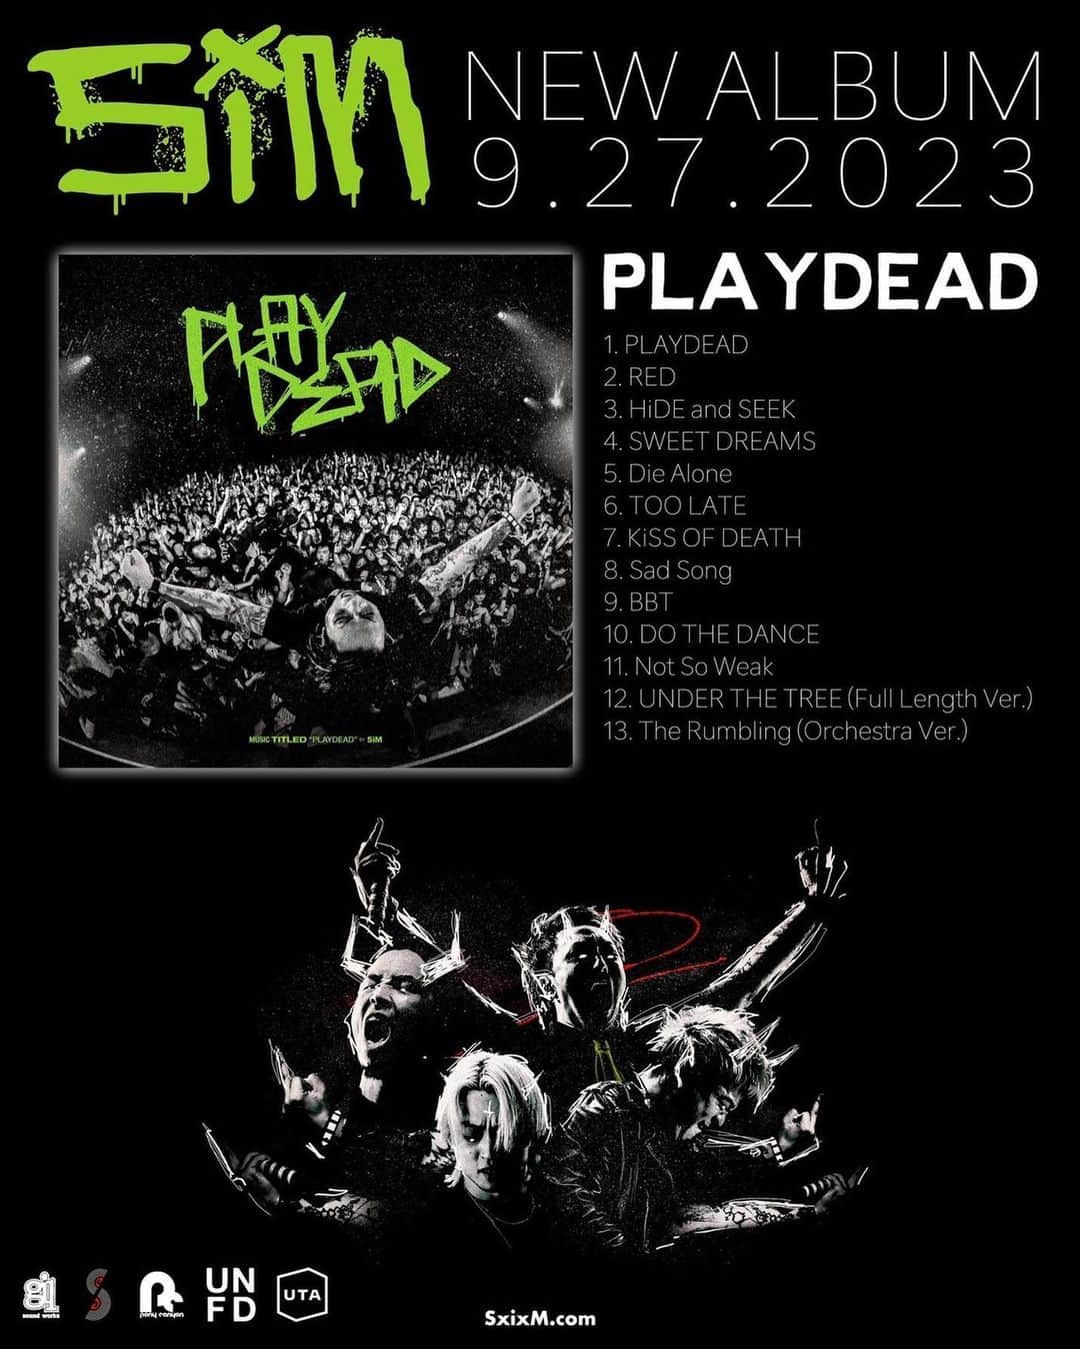 SiMのインスタグラム：「【PLAYDEAD】 SiMの最新アルバム『PLAYDEAD』音楽配信サイトにて配信中！！  Our New Album “PLAYDEAD” is available at 12AM on September 27 local time!!  ▼Streaming / DL  https://lnk.to/playdead  01. PLAYDEAD 02. RED 03. HiDE and SEEK 04. SWEET DREAMS 05. Die Alone 06. TOO LATE 07. KiSS OF DEATH 08. Sad Song 09. BBT 10. DO THE DANCE 11. Not So Weak 12. UNDER THE TREE (Full Length Ver.) 13. The Rumbling (Orchestra Ver.)  https://sim.komi.io/  #SiM #SiM6th #PLAYDEAD」